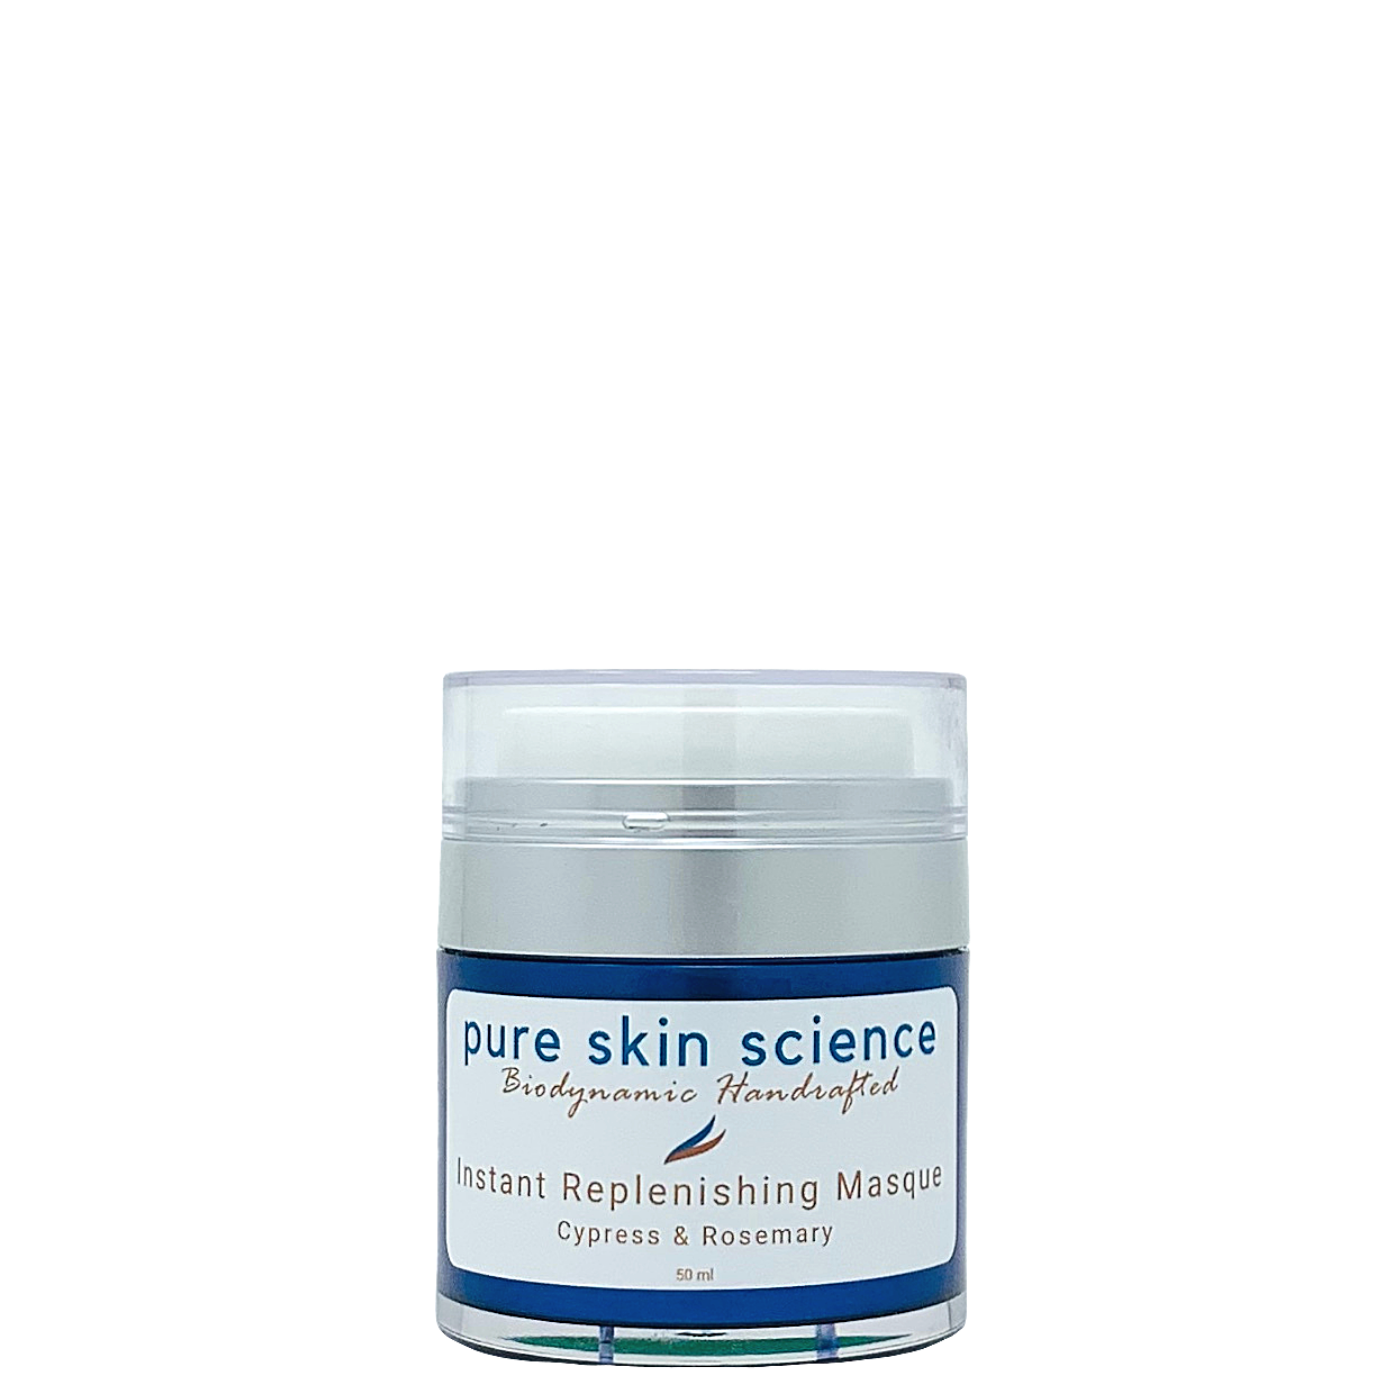 Instant Replenishing Masque by Pure Skin Science